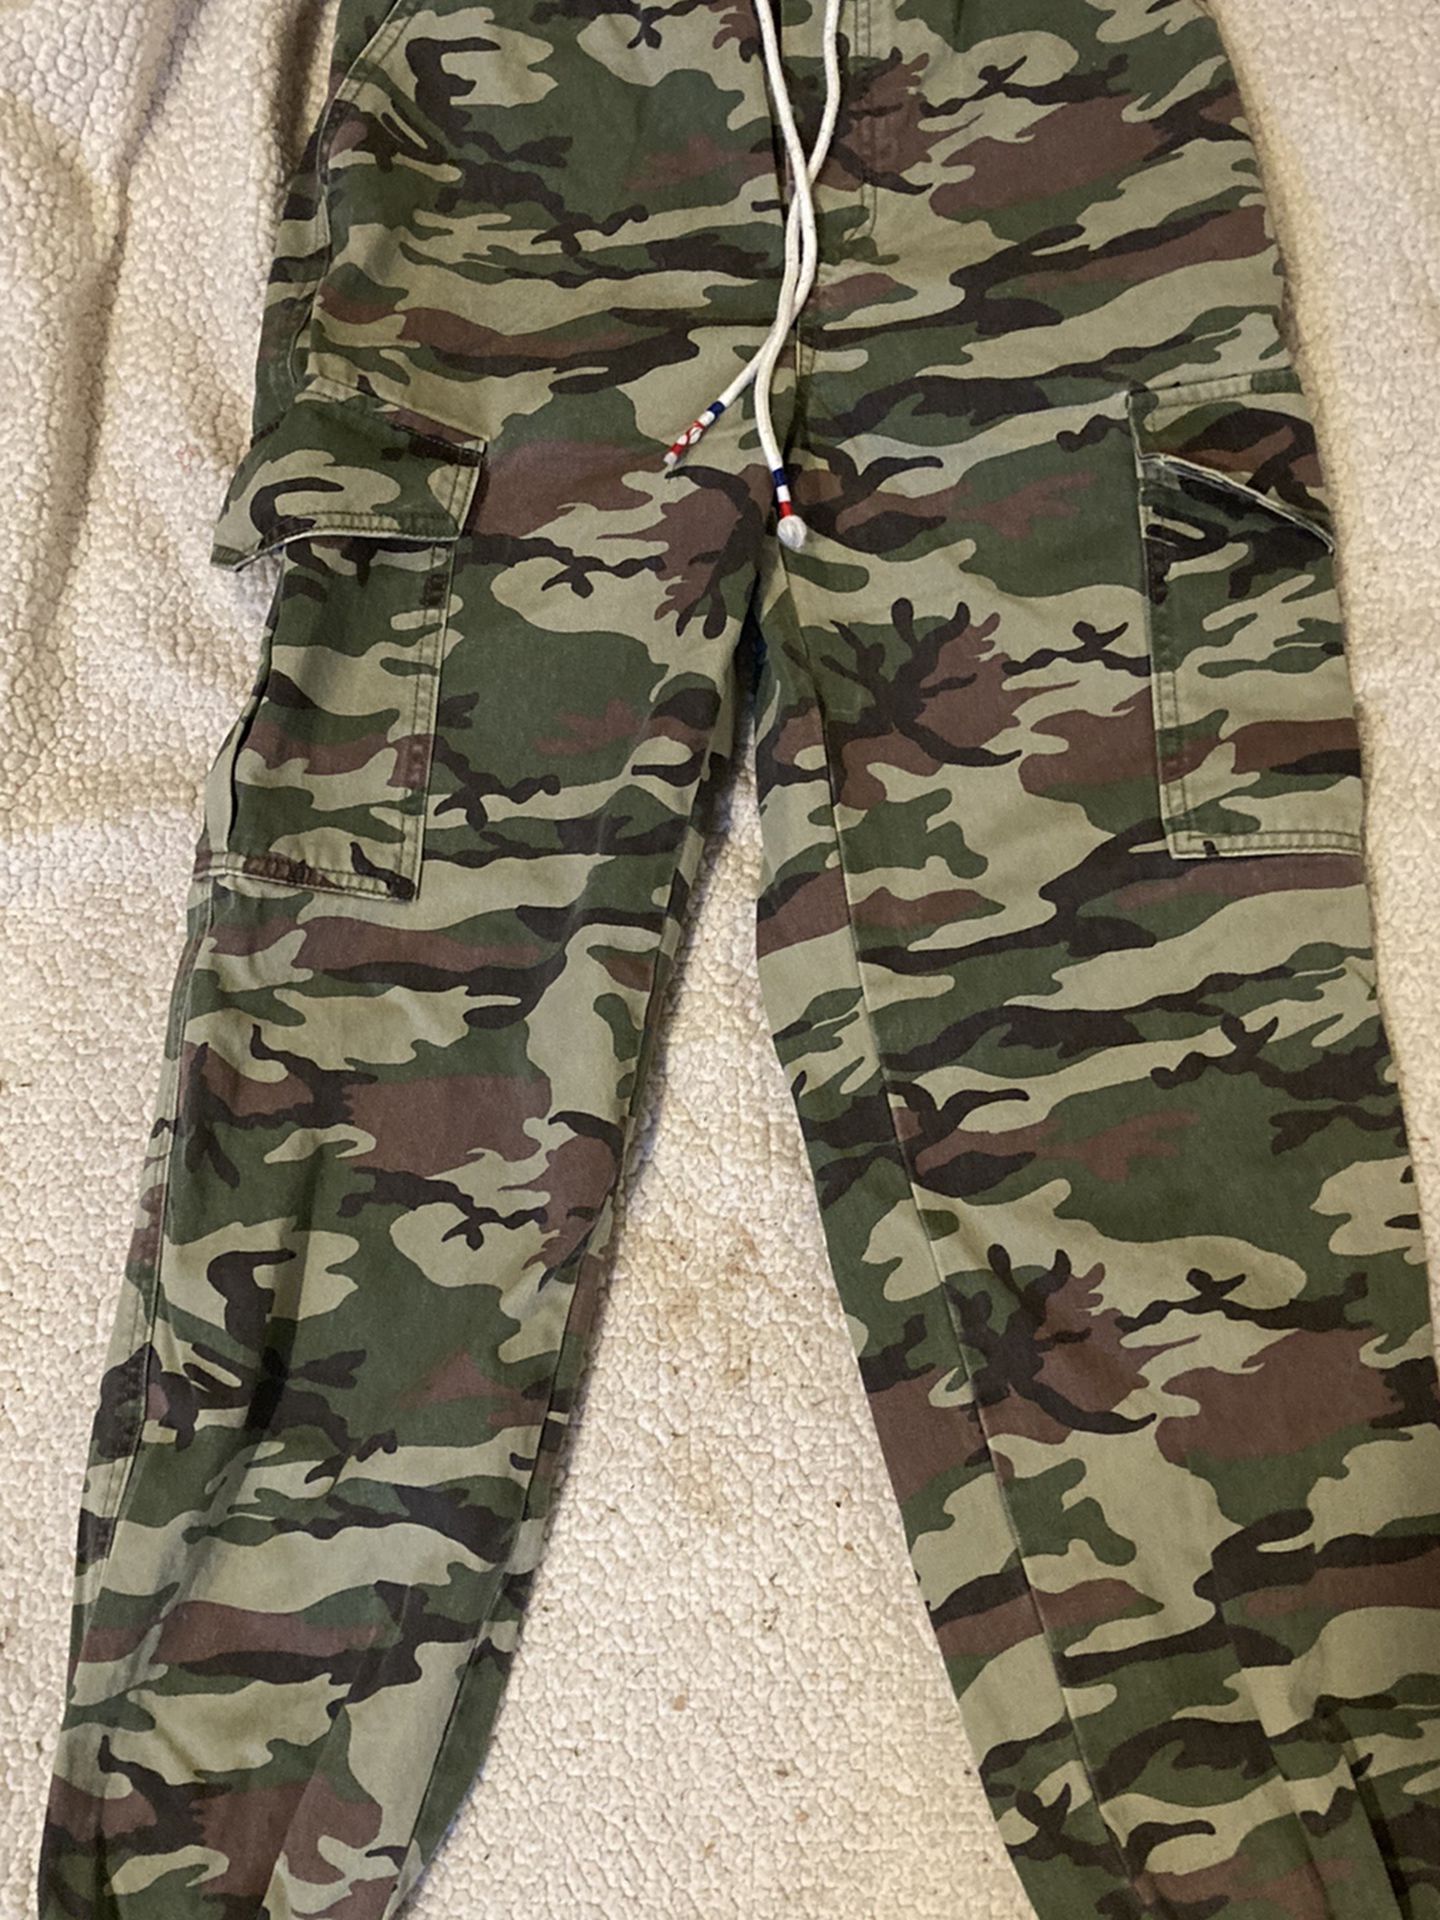 NWOT Forever 21 Camo Pants